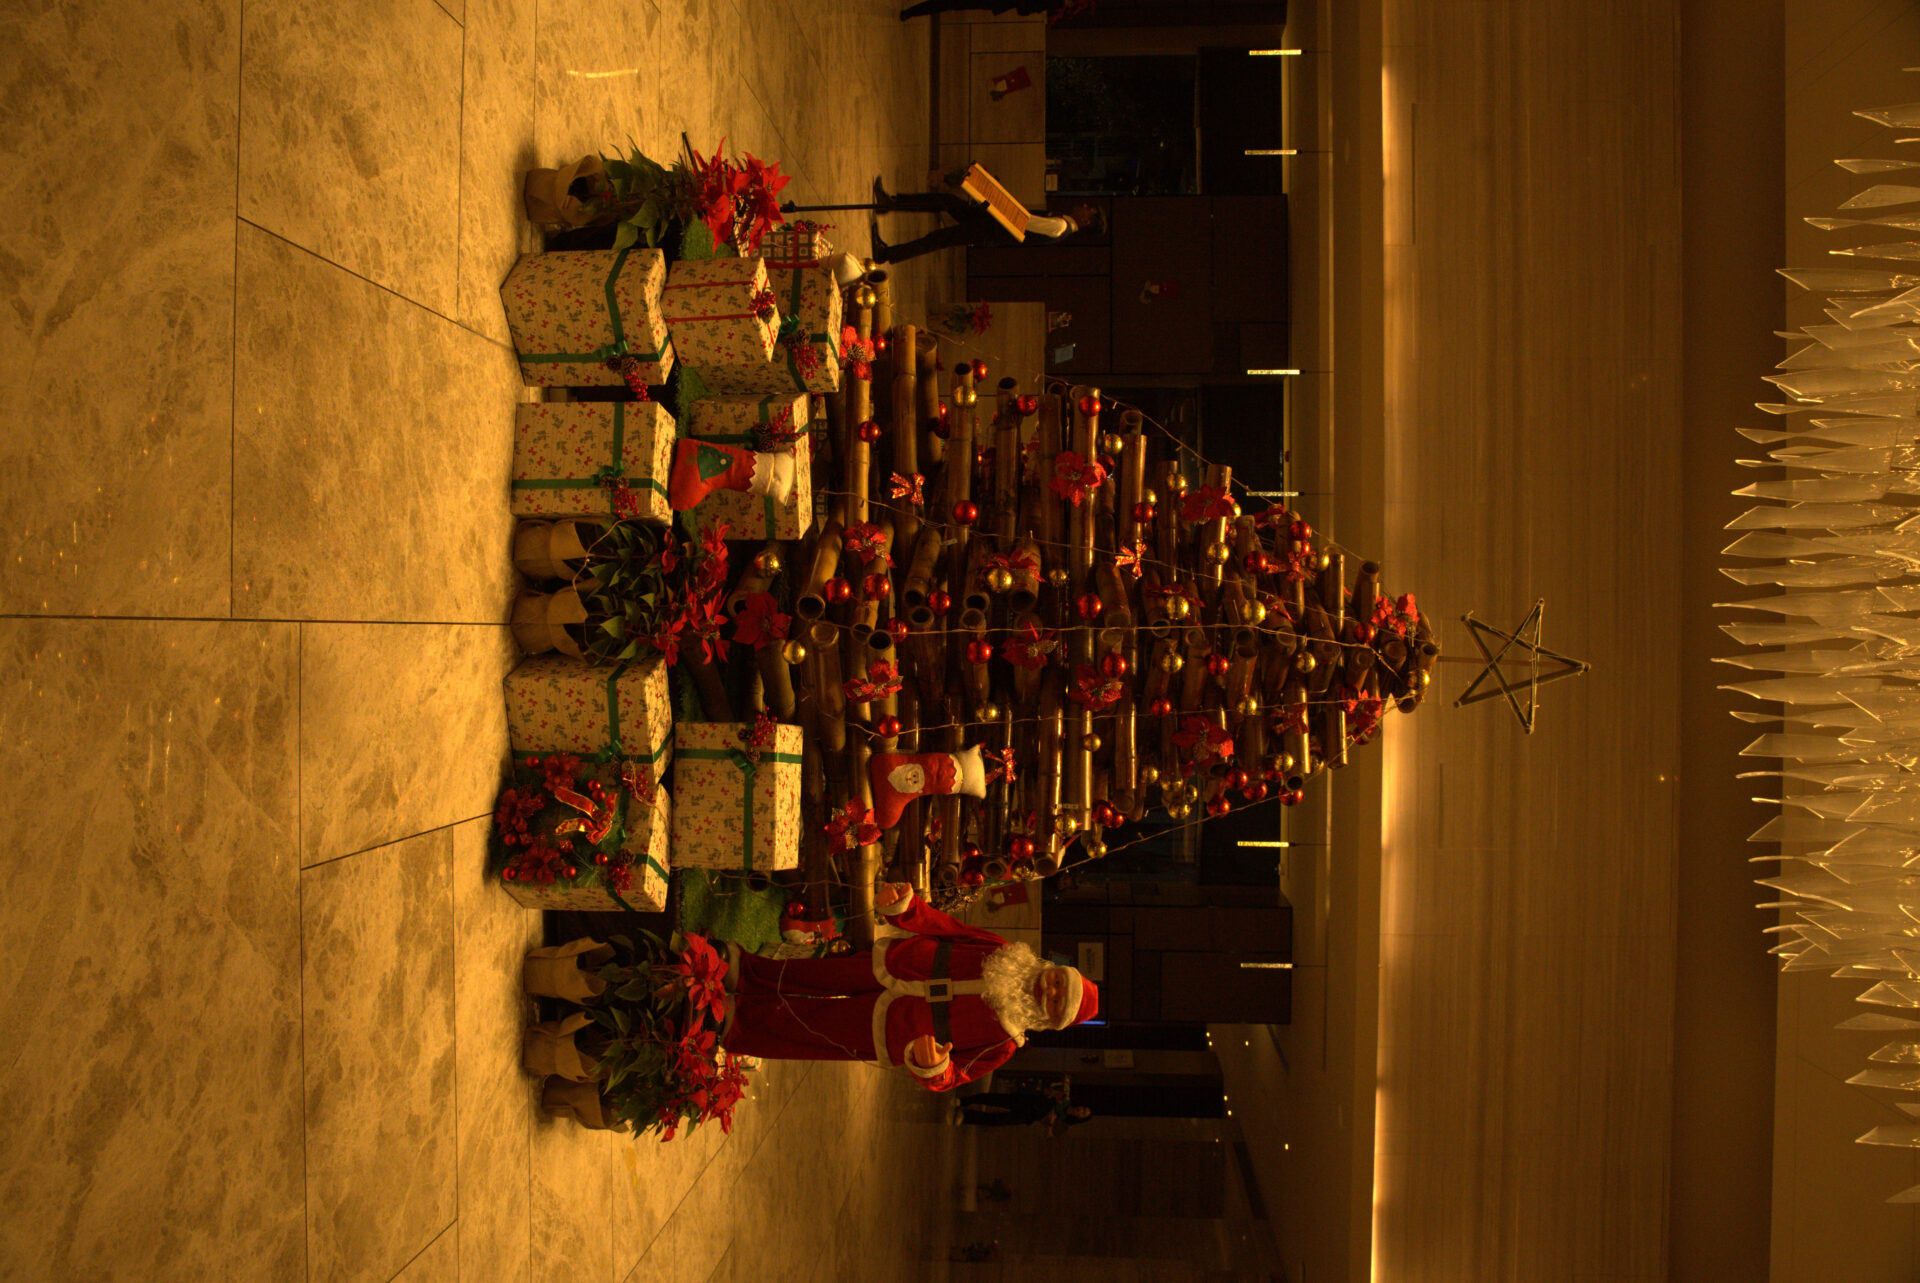 Sheraton Grand Bengaluru Whitefield Hotel and Convention Center commenced festive season with its annual Christmas Tree lighting event